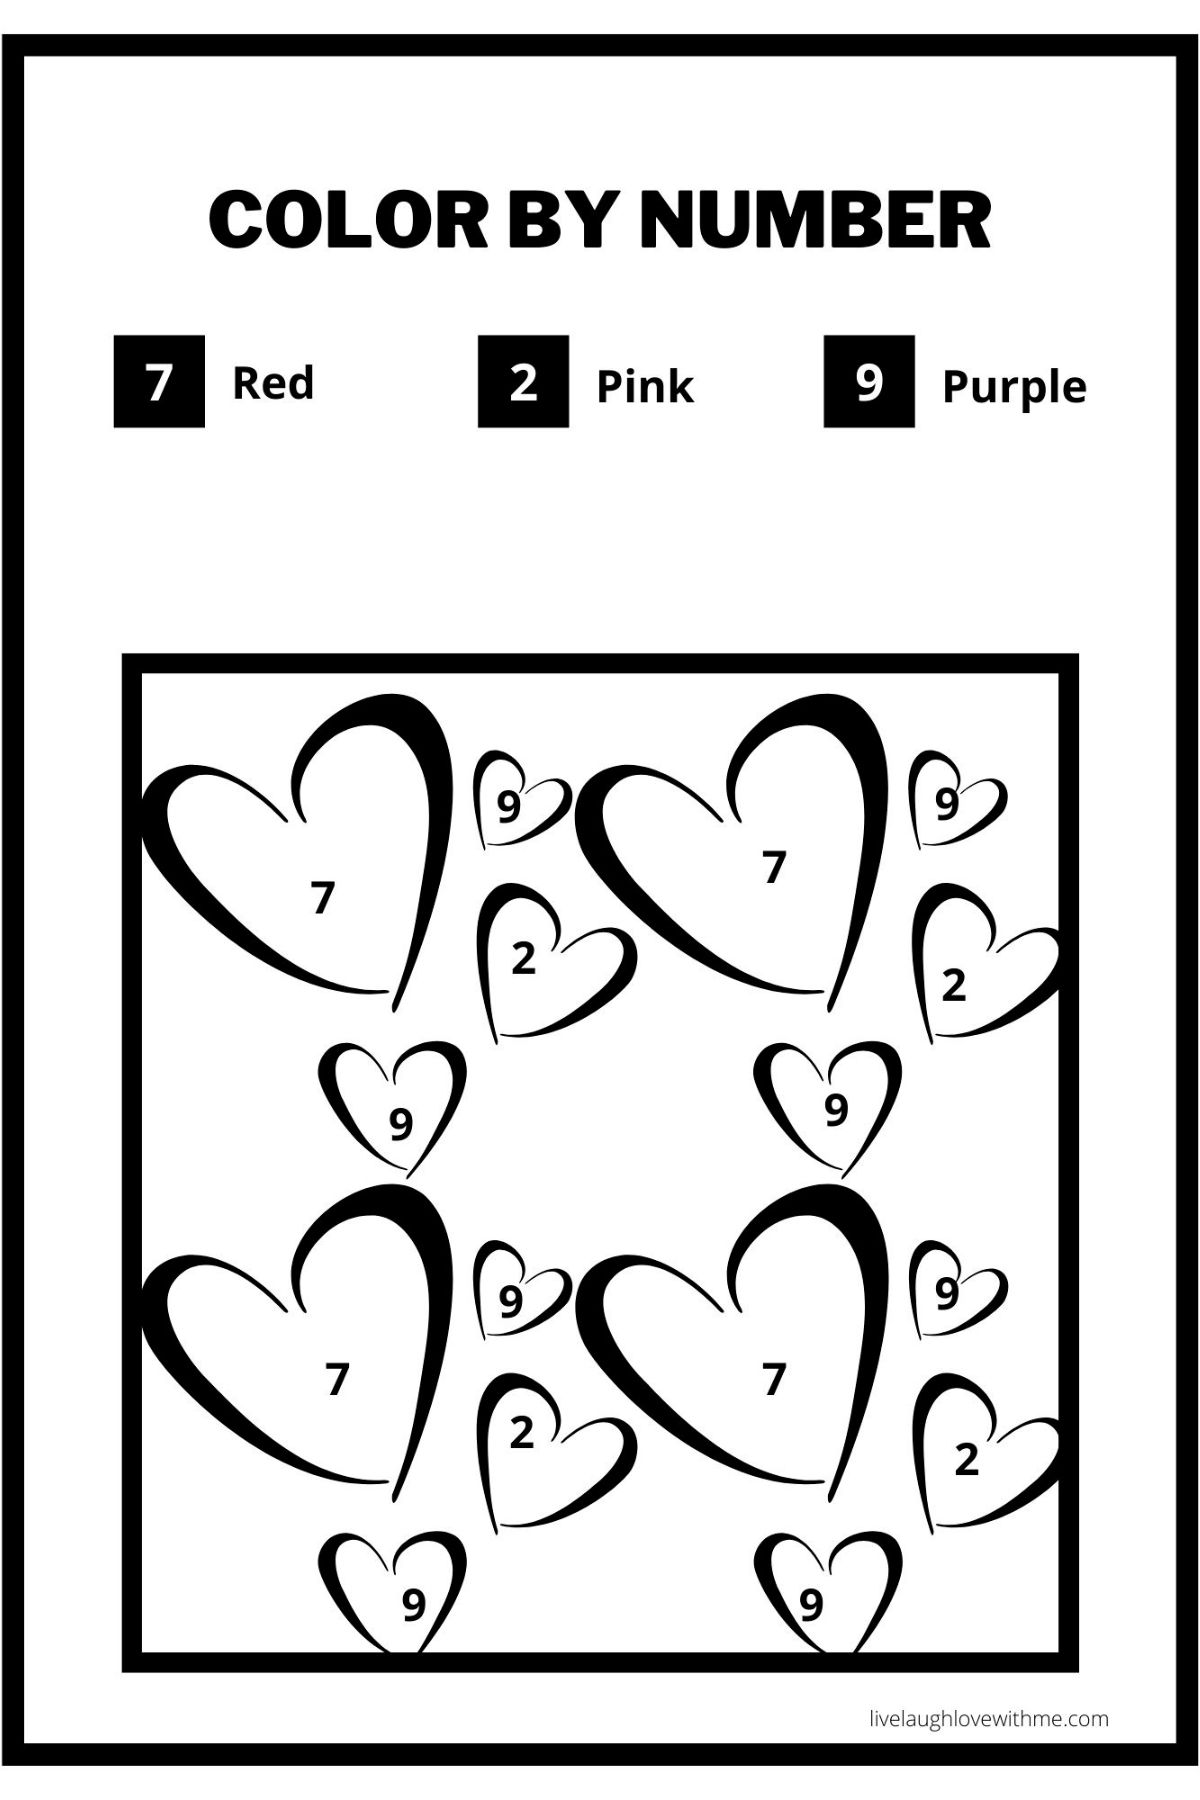 Color by number heart printable.